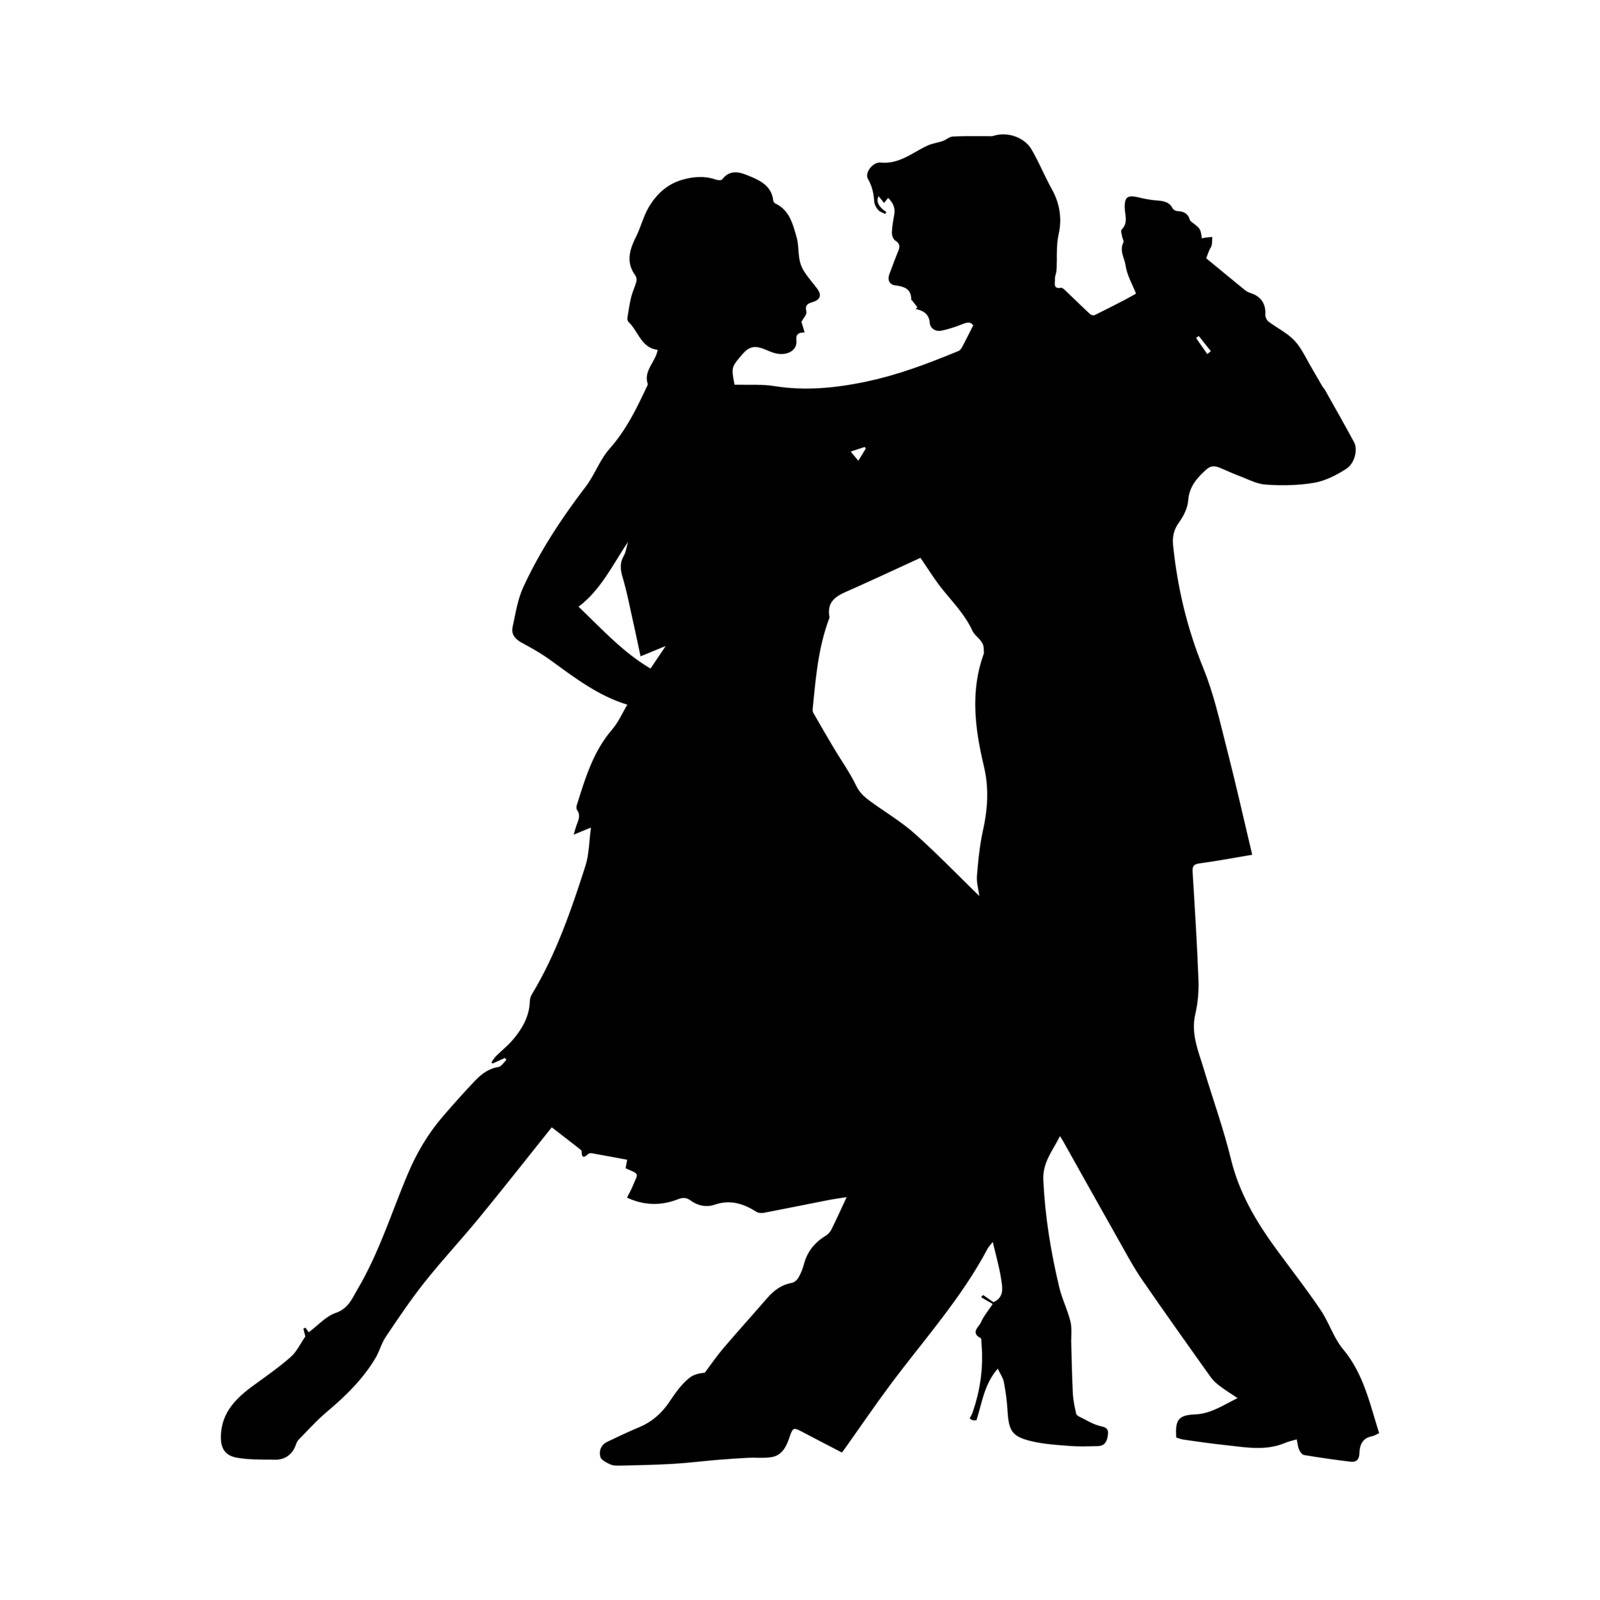 Ballroom and sports dances, silhouette of a pair of dancers